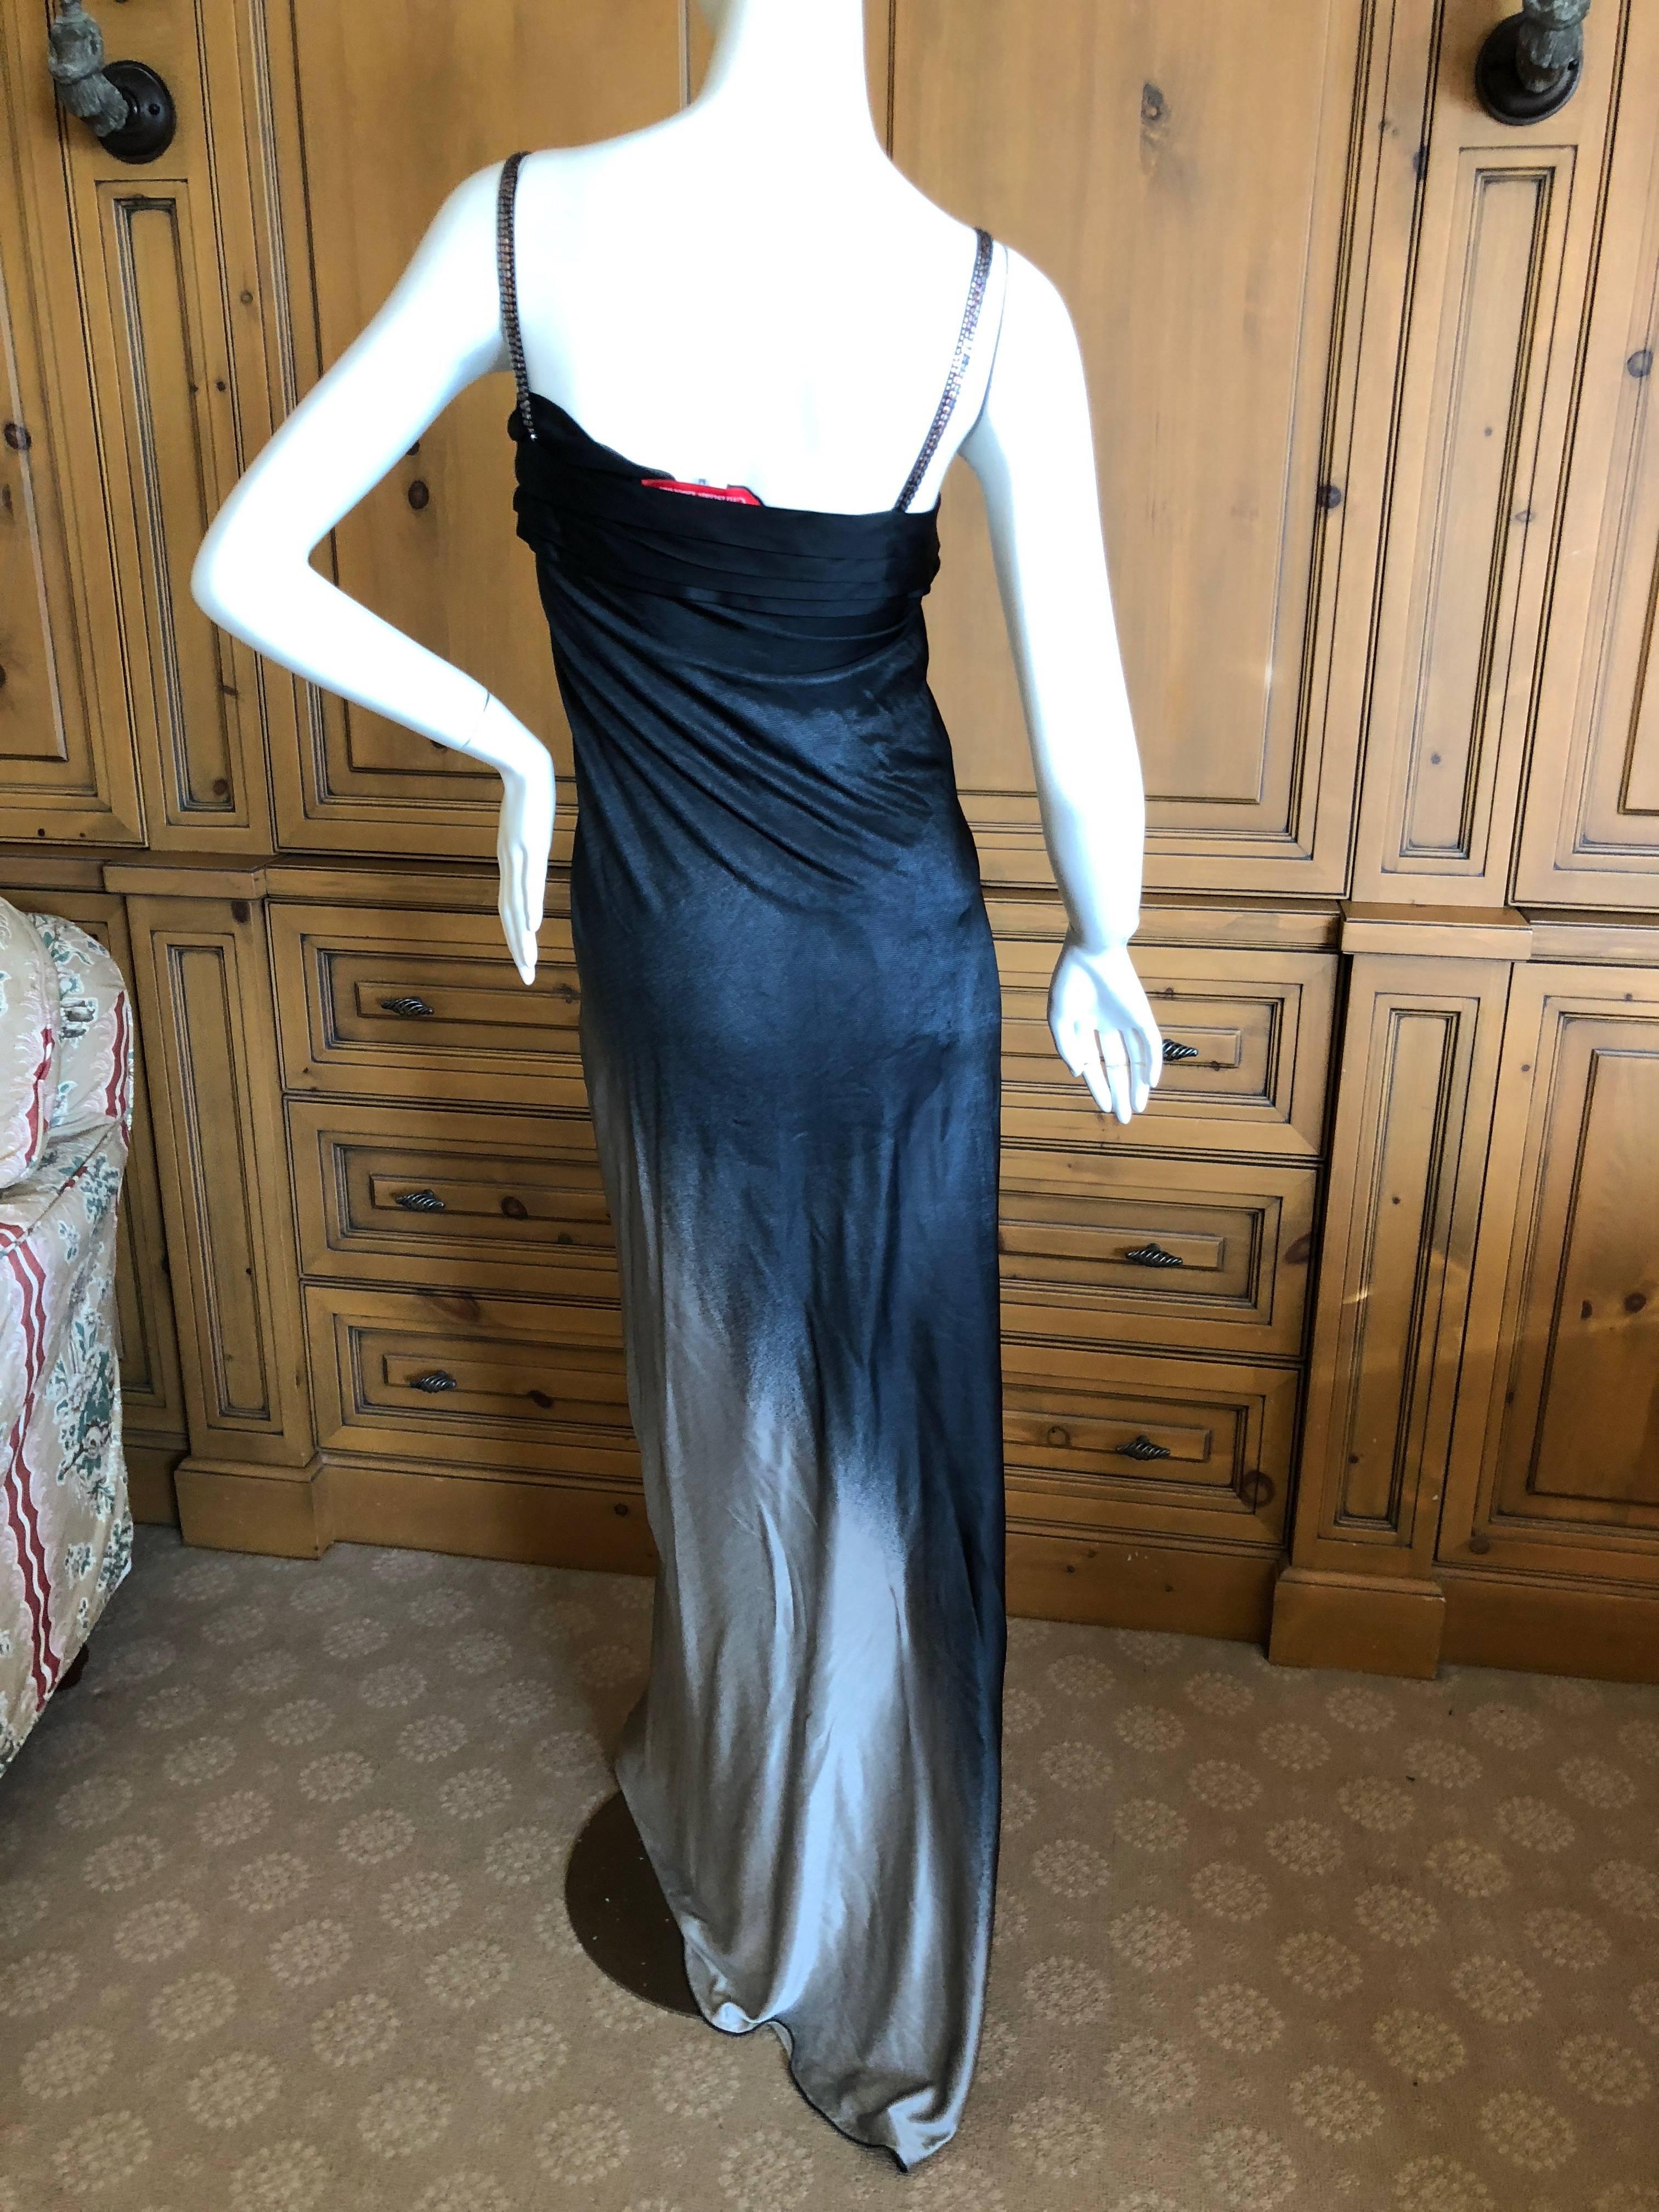 Christian Lacroix Silver and Black Vintage Silk Evening Dress with Sequin Detail For Sale 6